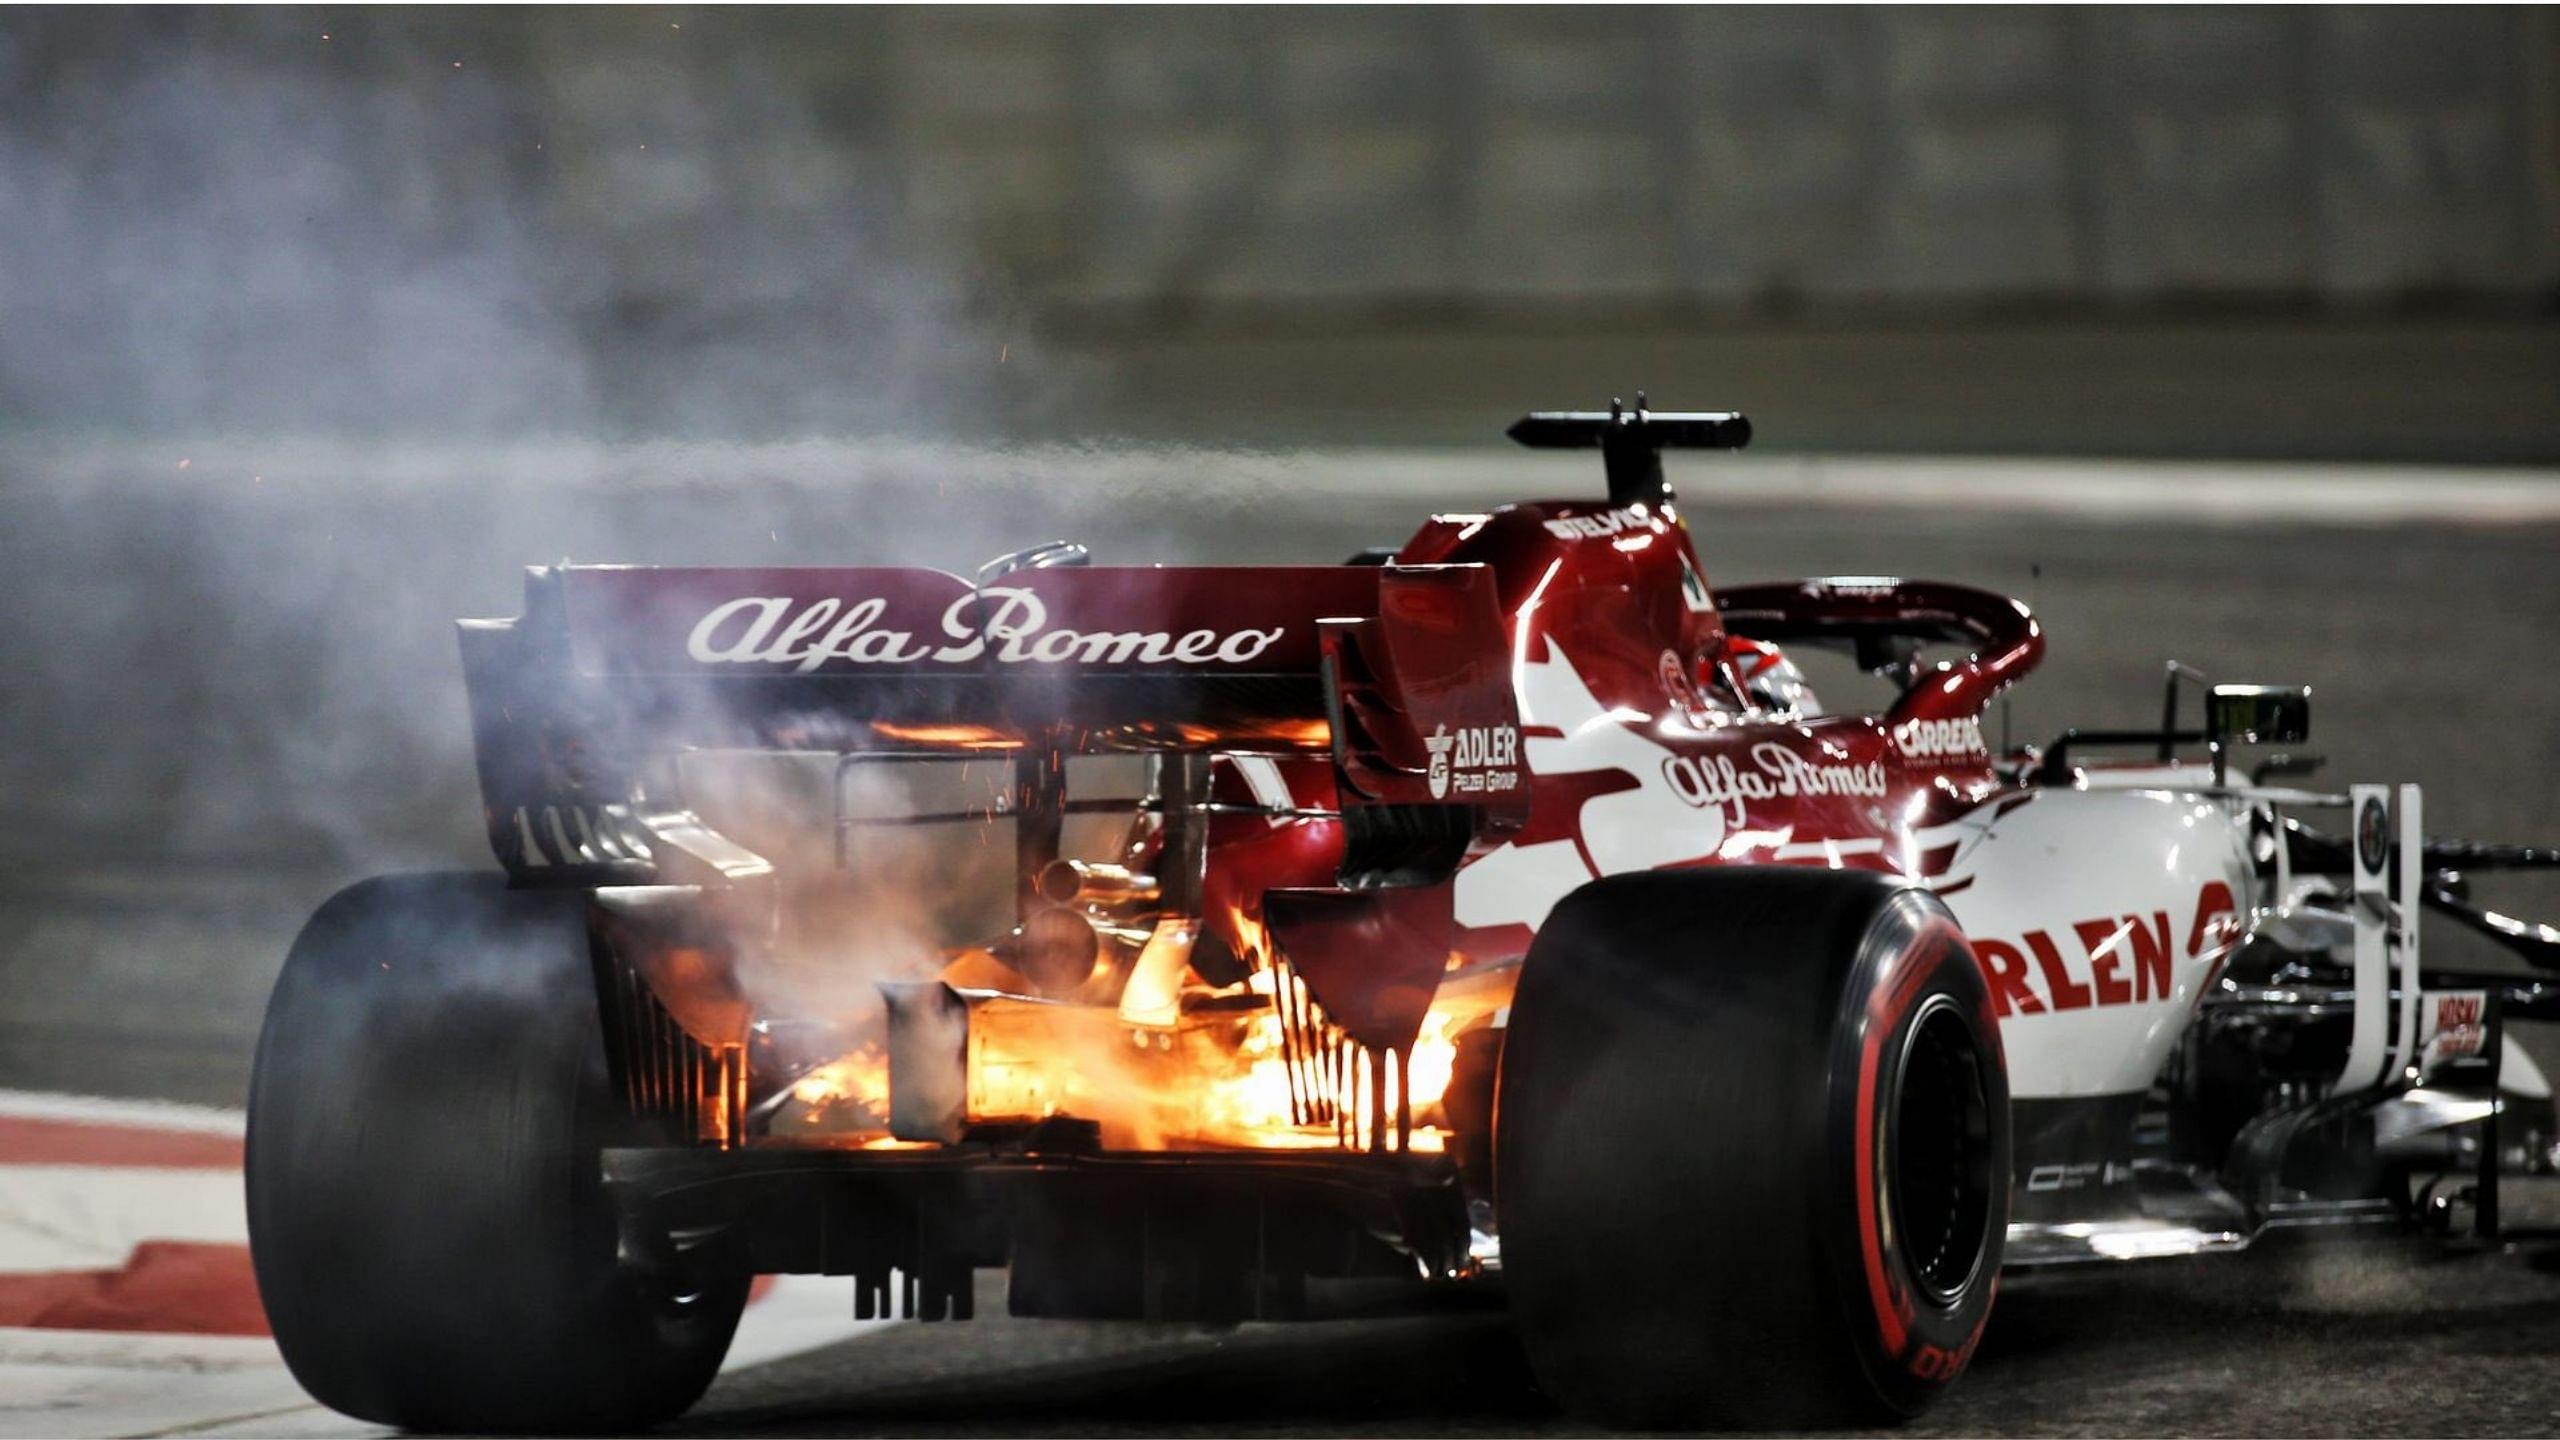 "Nothing scary about it" - 'Ice Man' Kimi Raikkonen calm about fire on his Alfa Romeo during Abu Dhabi FP2